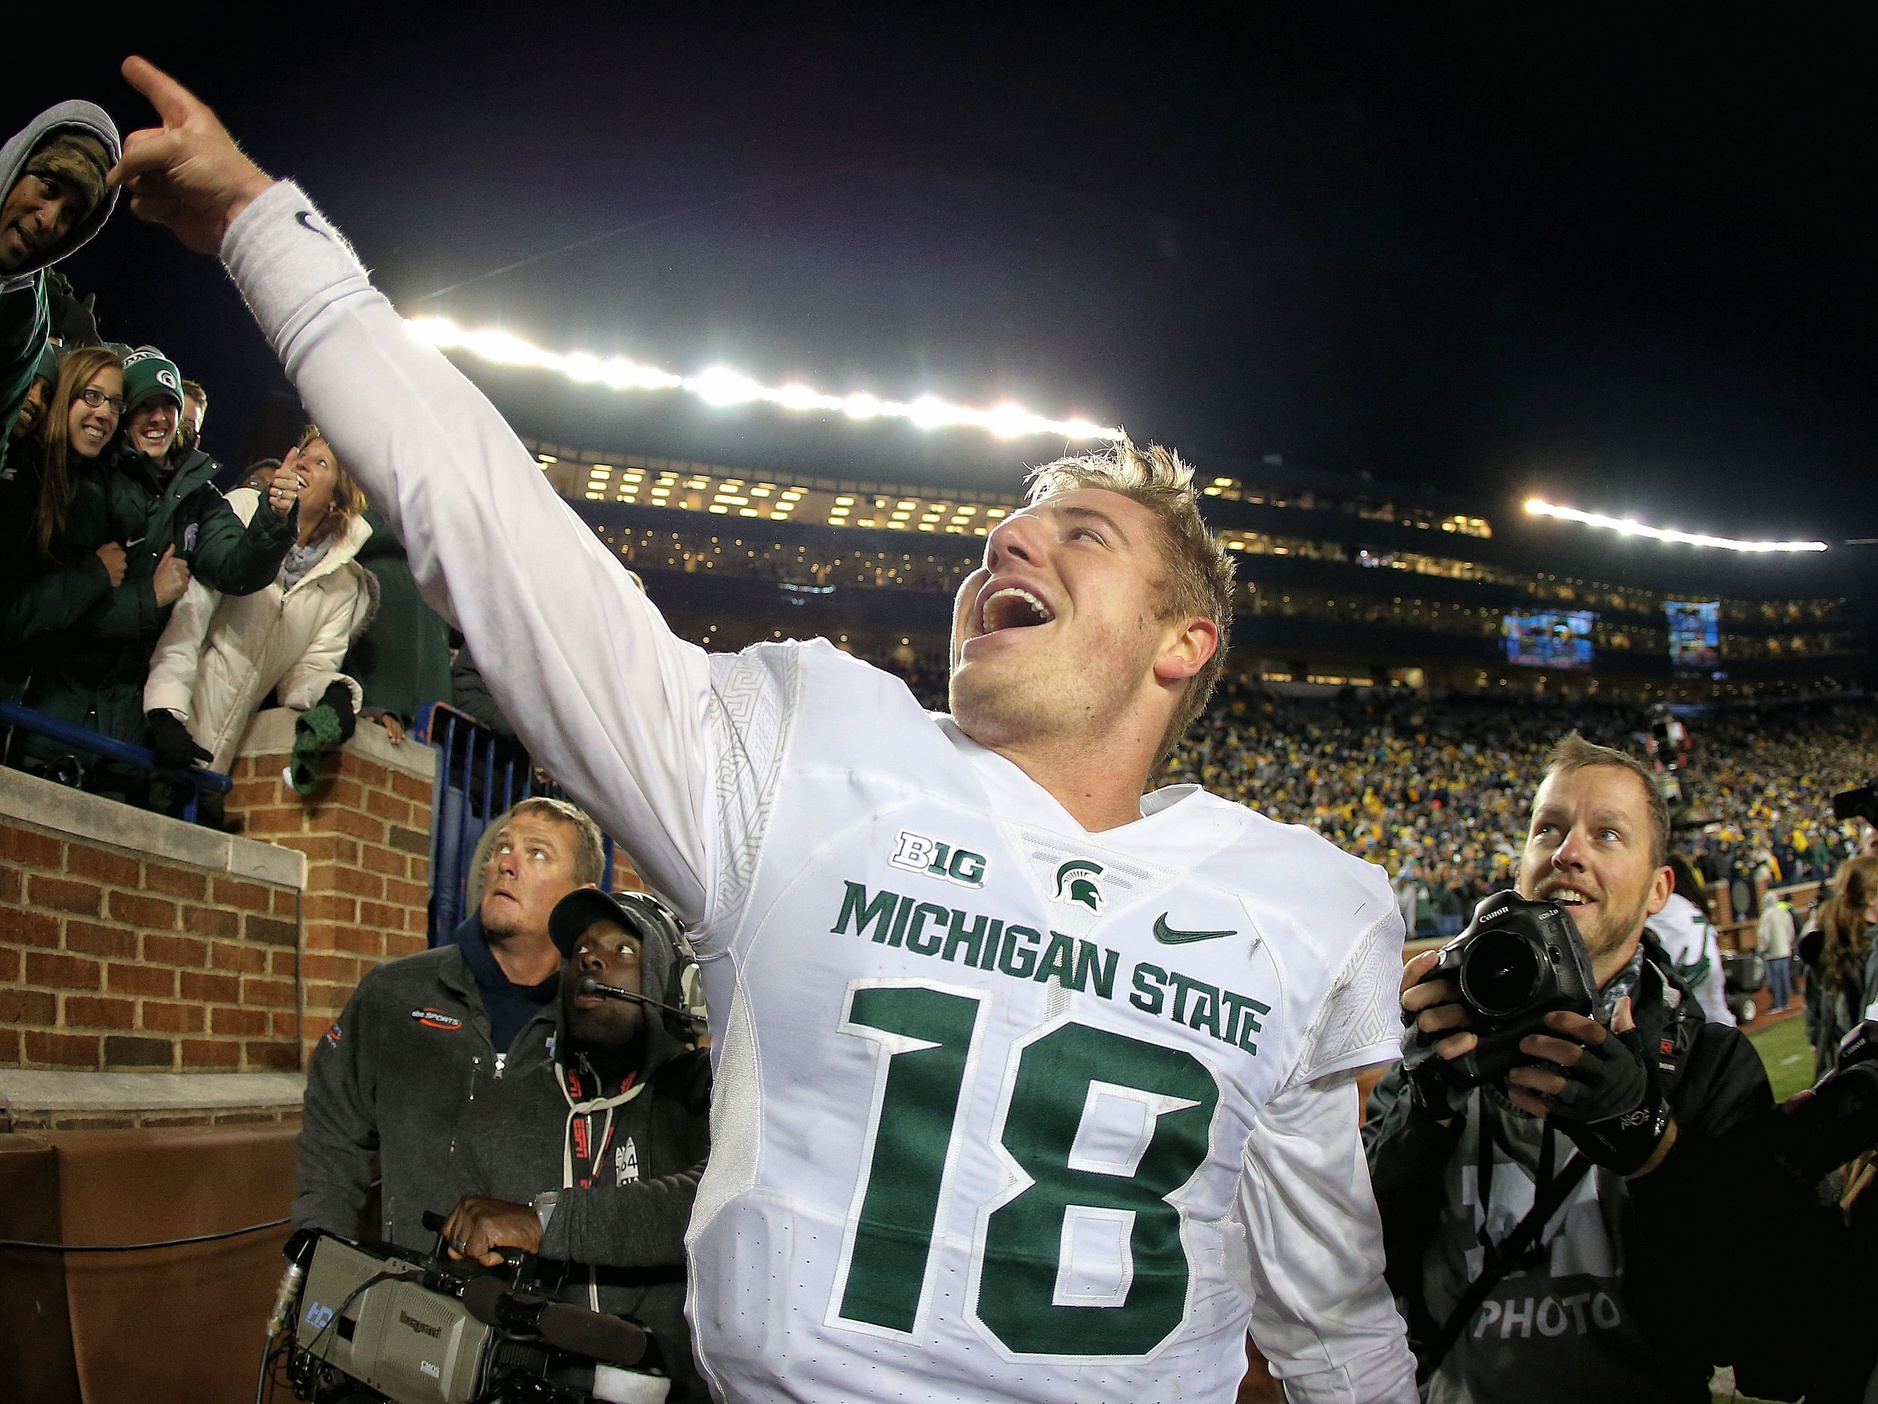 Oct 17, 2015; Ann Arbor, MI, USA; Michigan State Spartans quarterback Connor Cook (18) celebrates a win over the Michigan Wolverines during the second half of a game at Michigan Stadium. Mandatory Credit: Mike Carter-USA TODAY Sports